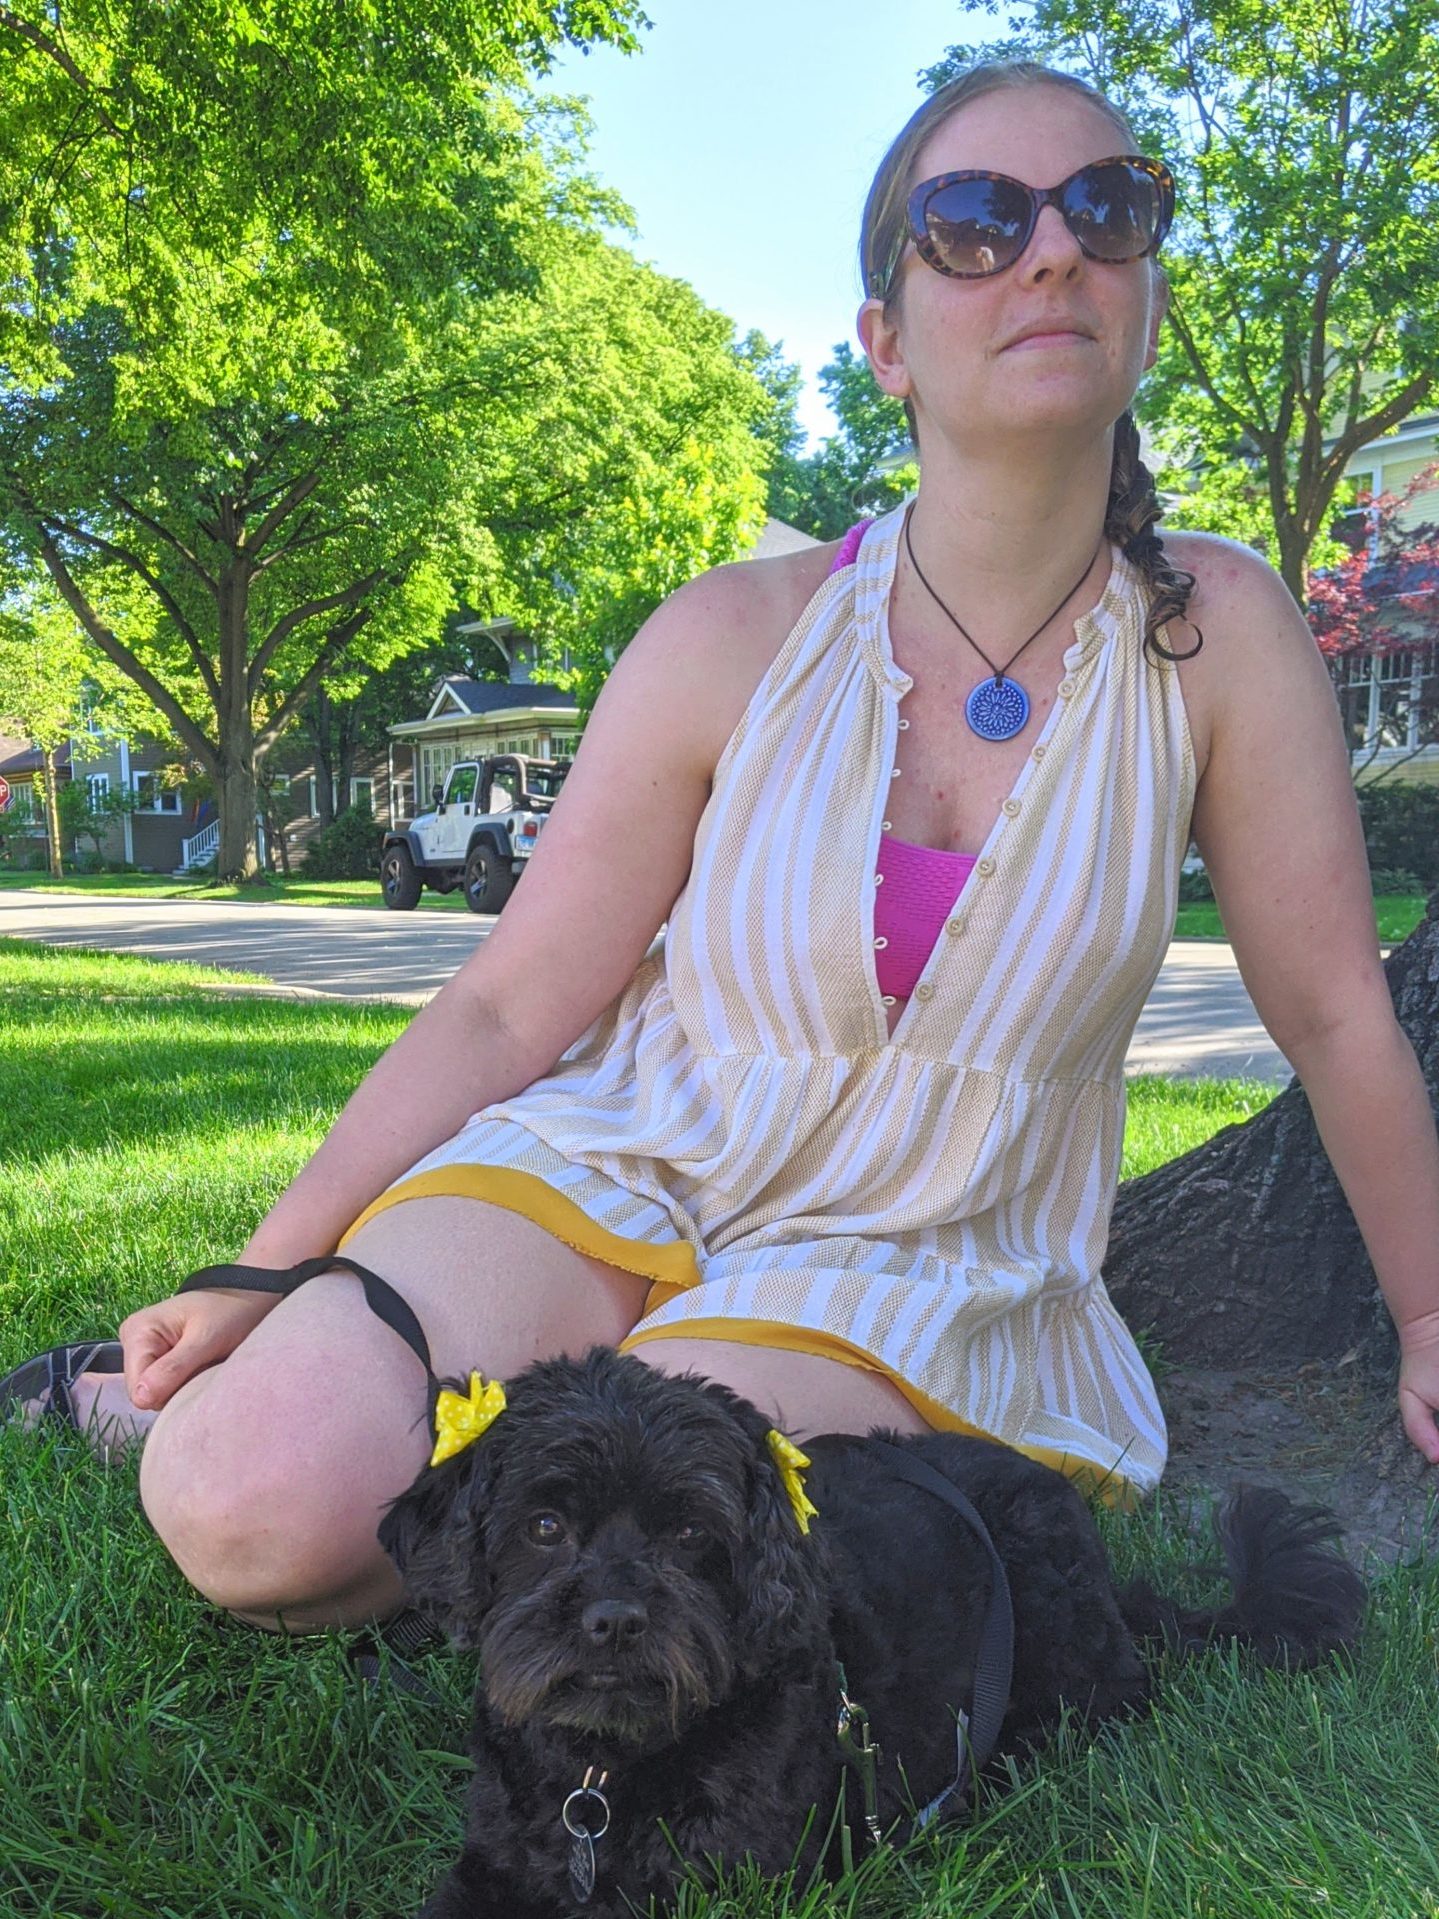 woman wearing sunglasses sitting in the grass with small black dog